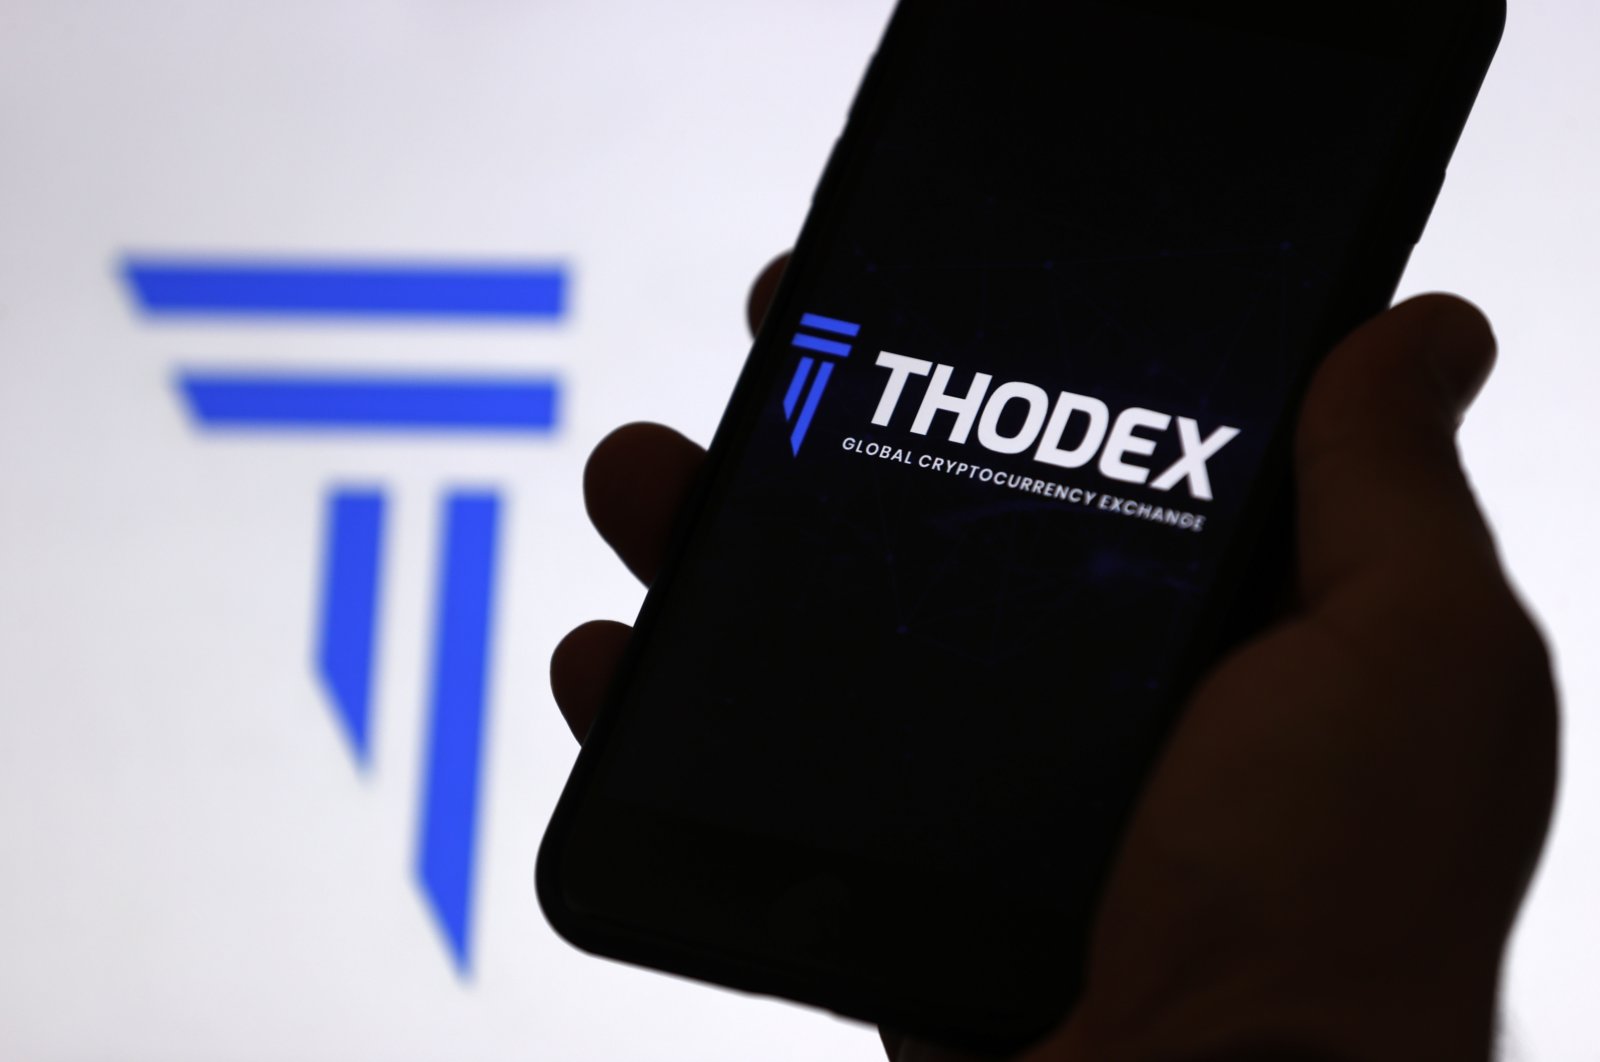 The Thodex cryptocurrency exchange logo is displayed on a mobile phone screen, April 22, 2021. (AA Photo)